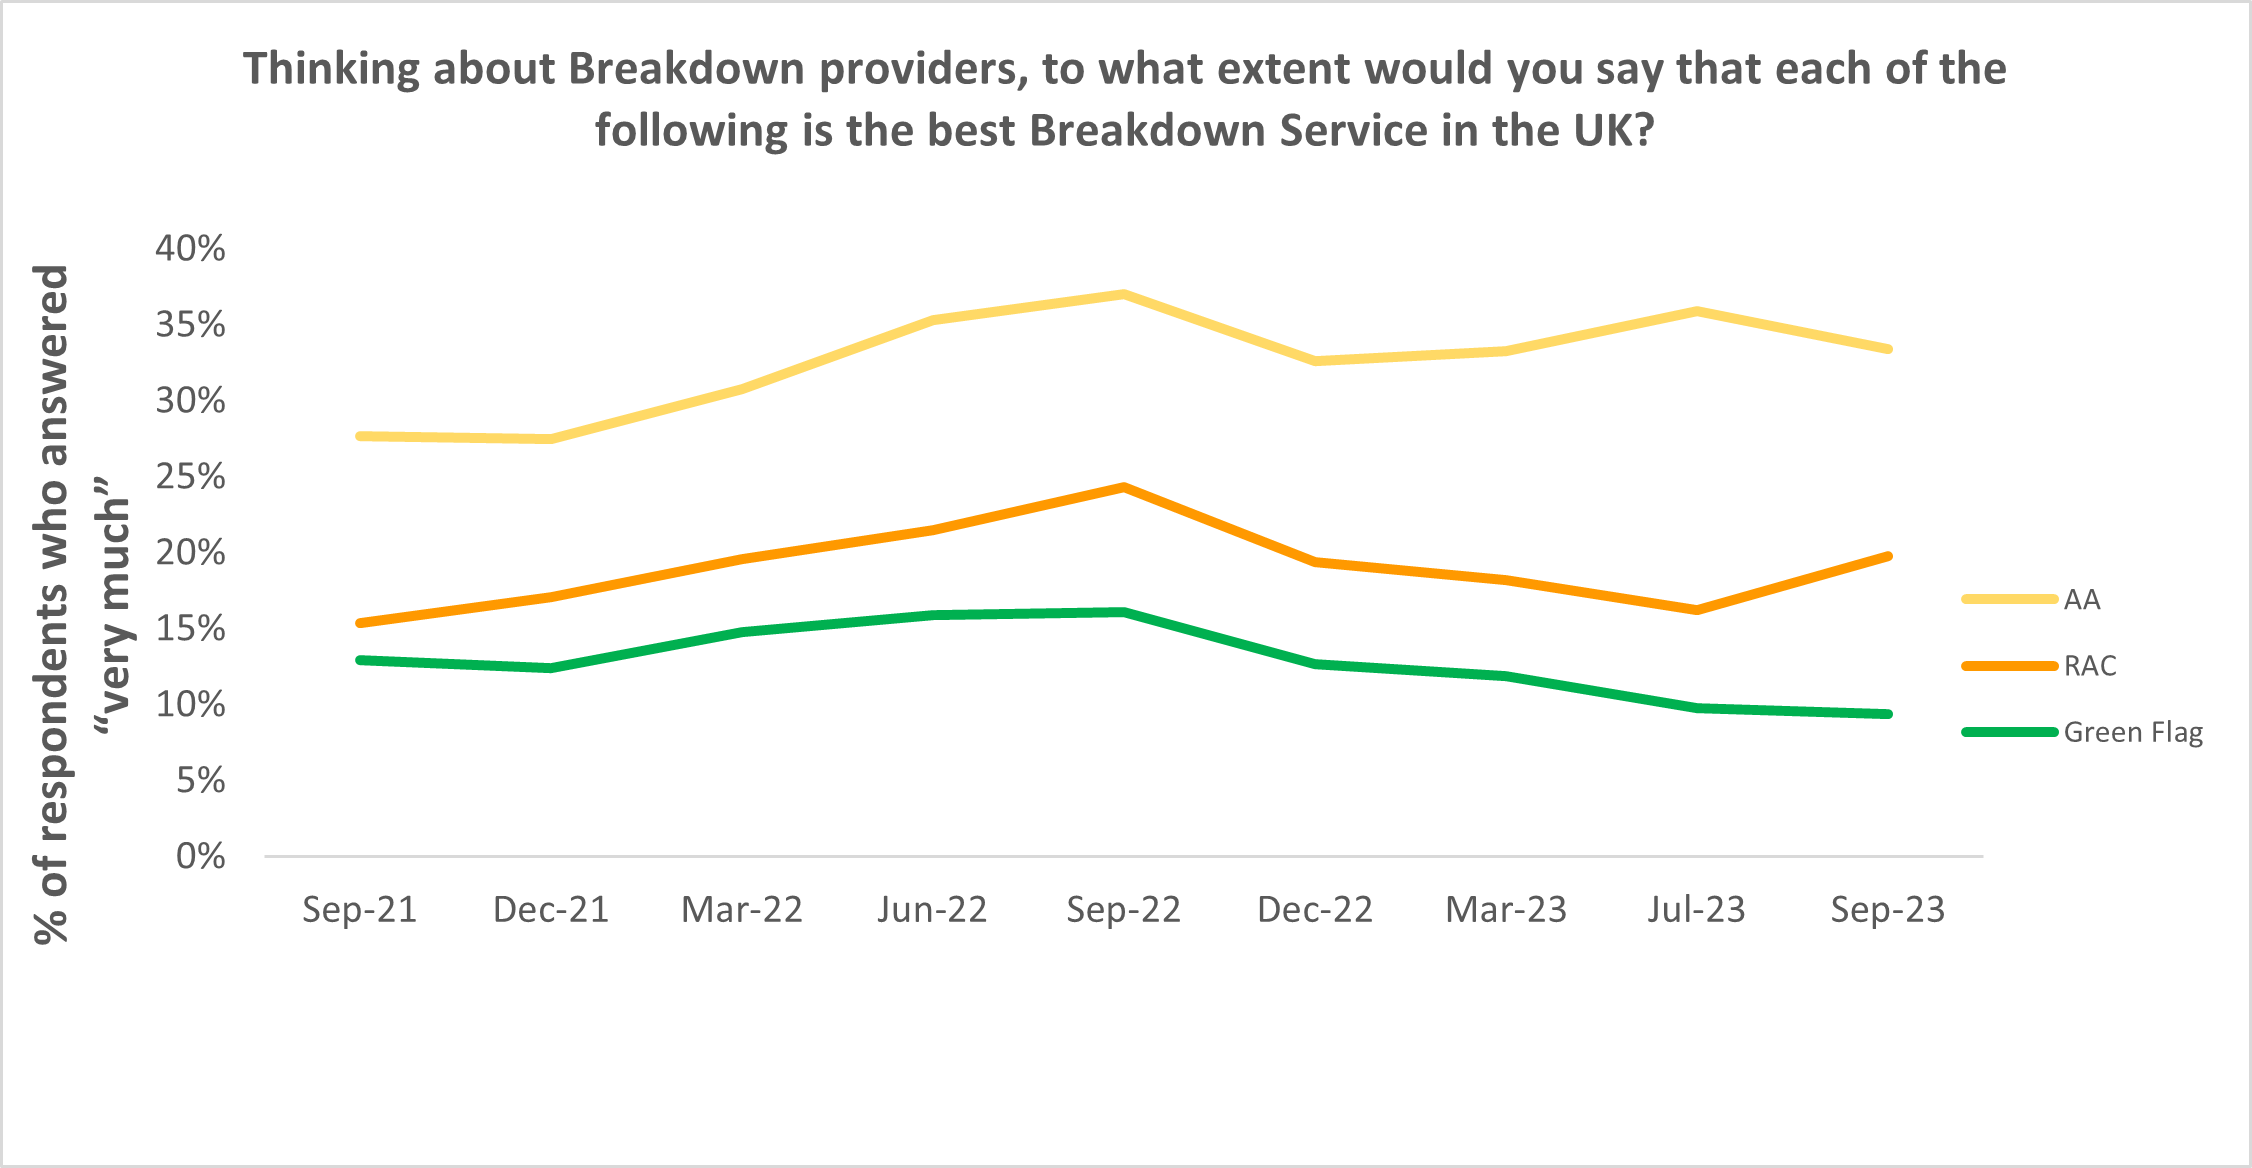 A graph showing that around 35% of respondents said the AA provides the best breakdown service in the UK versus the RAC and Green Flag.